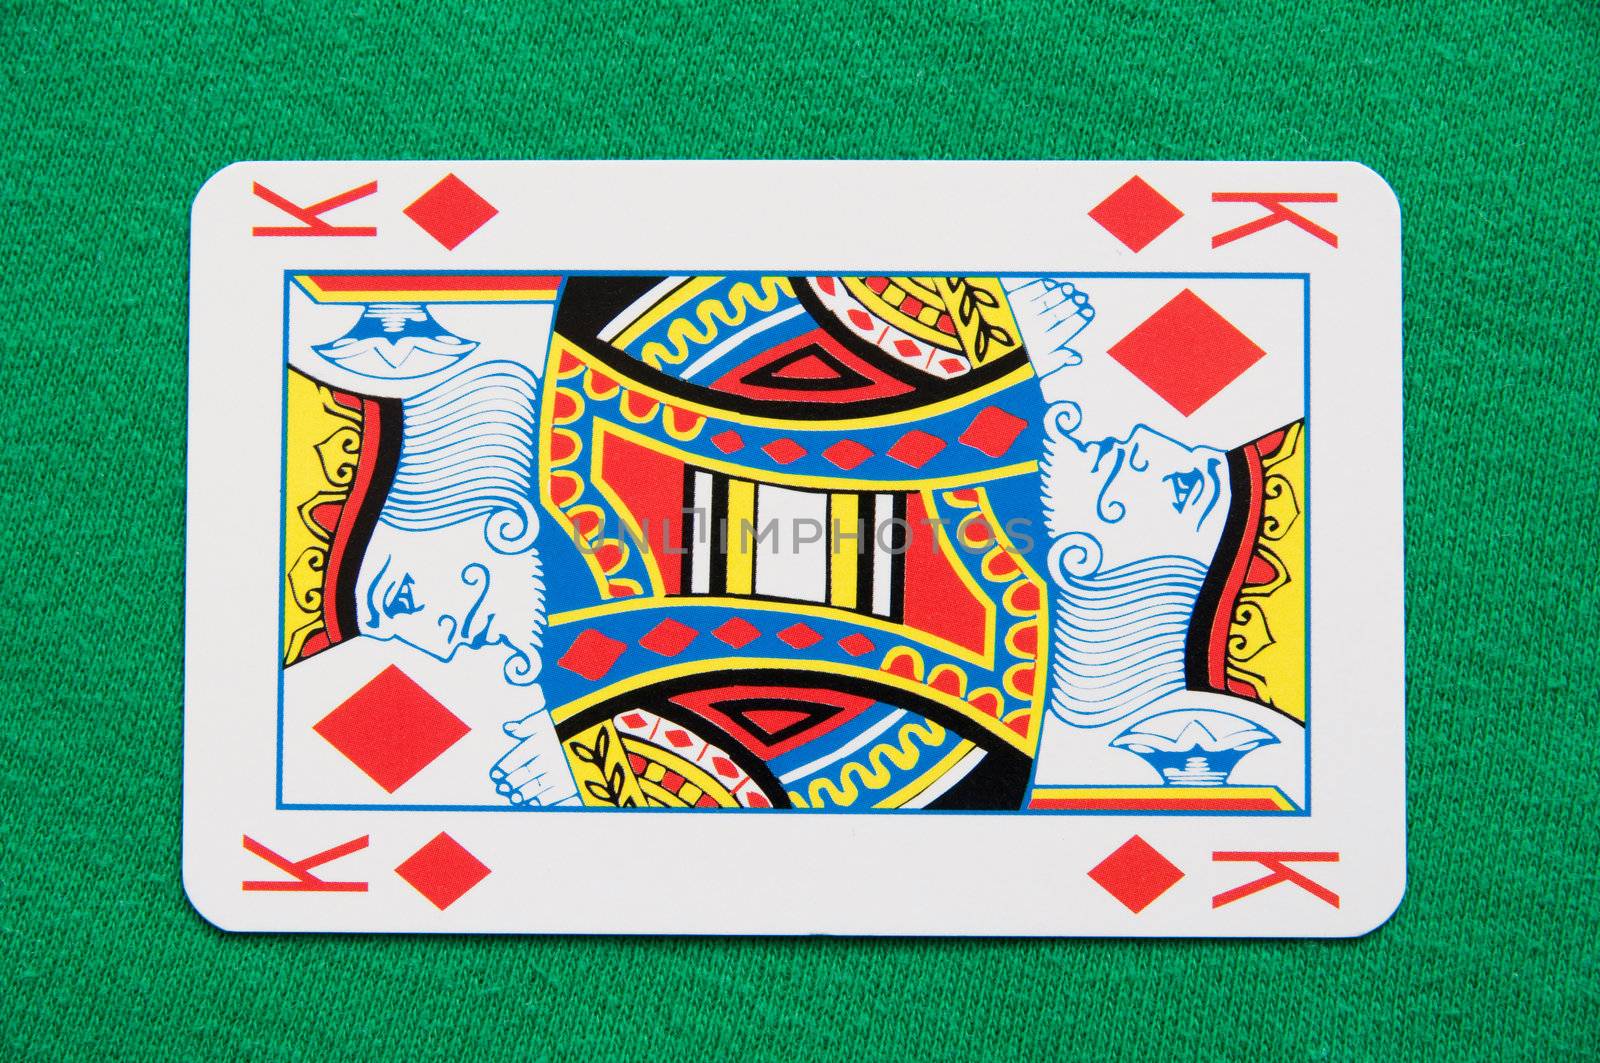 

A Colourful Photo of a Isolated King Playing Card